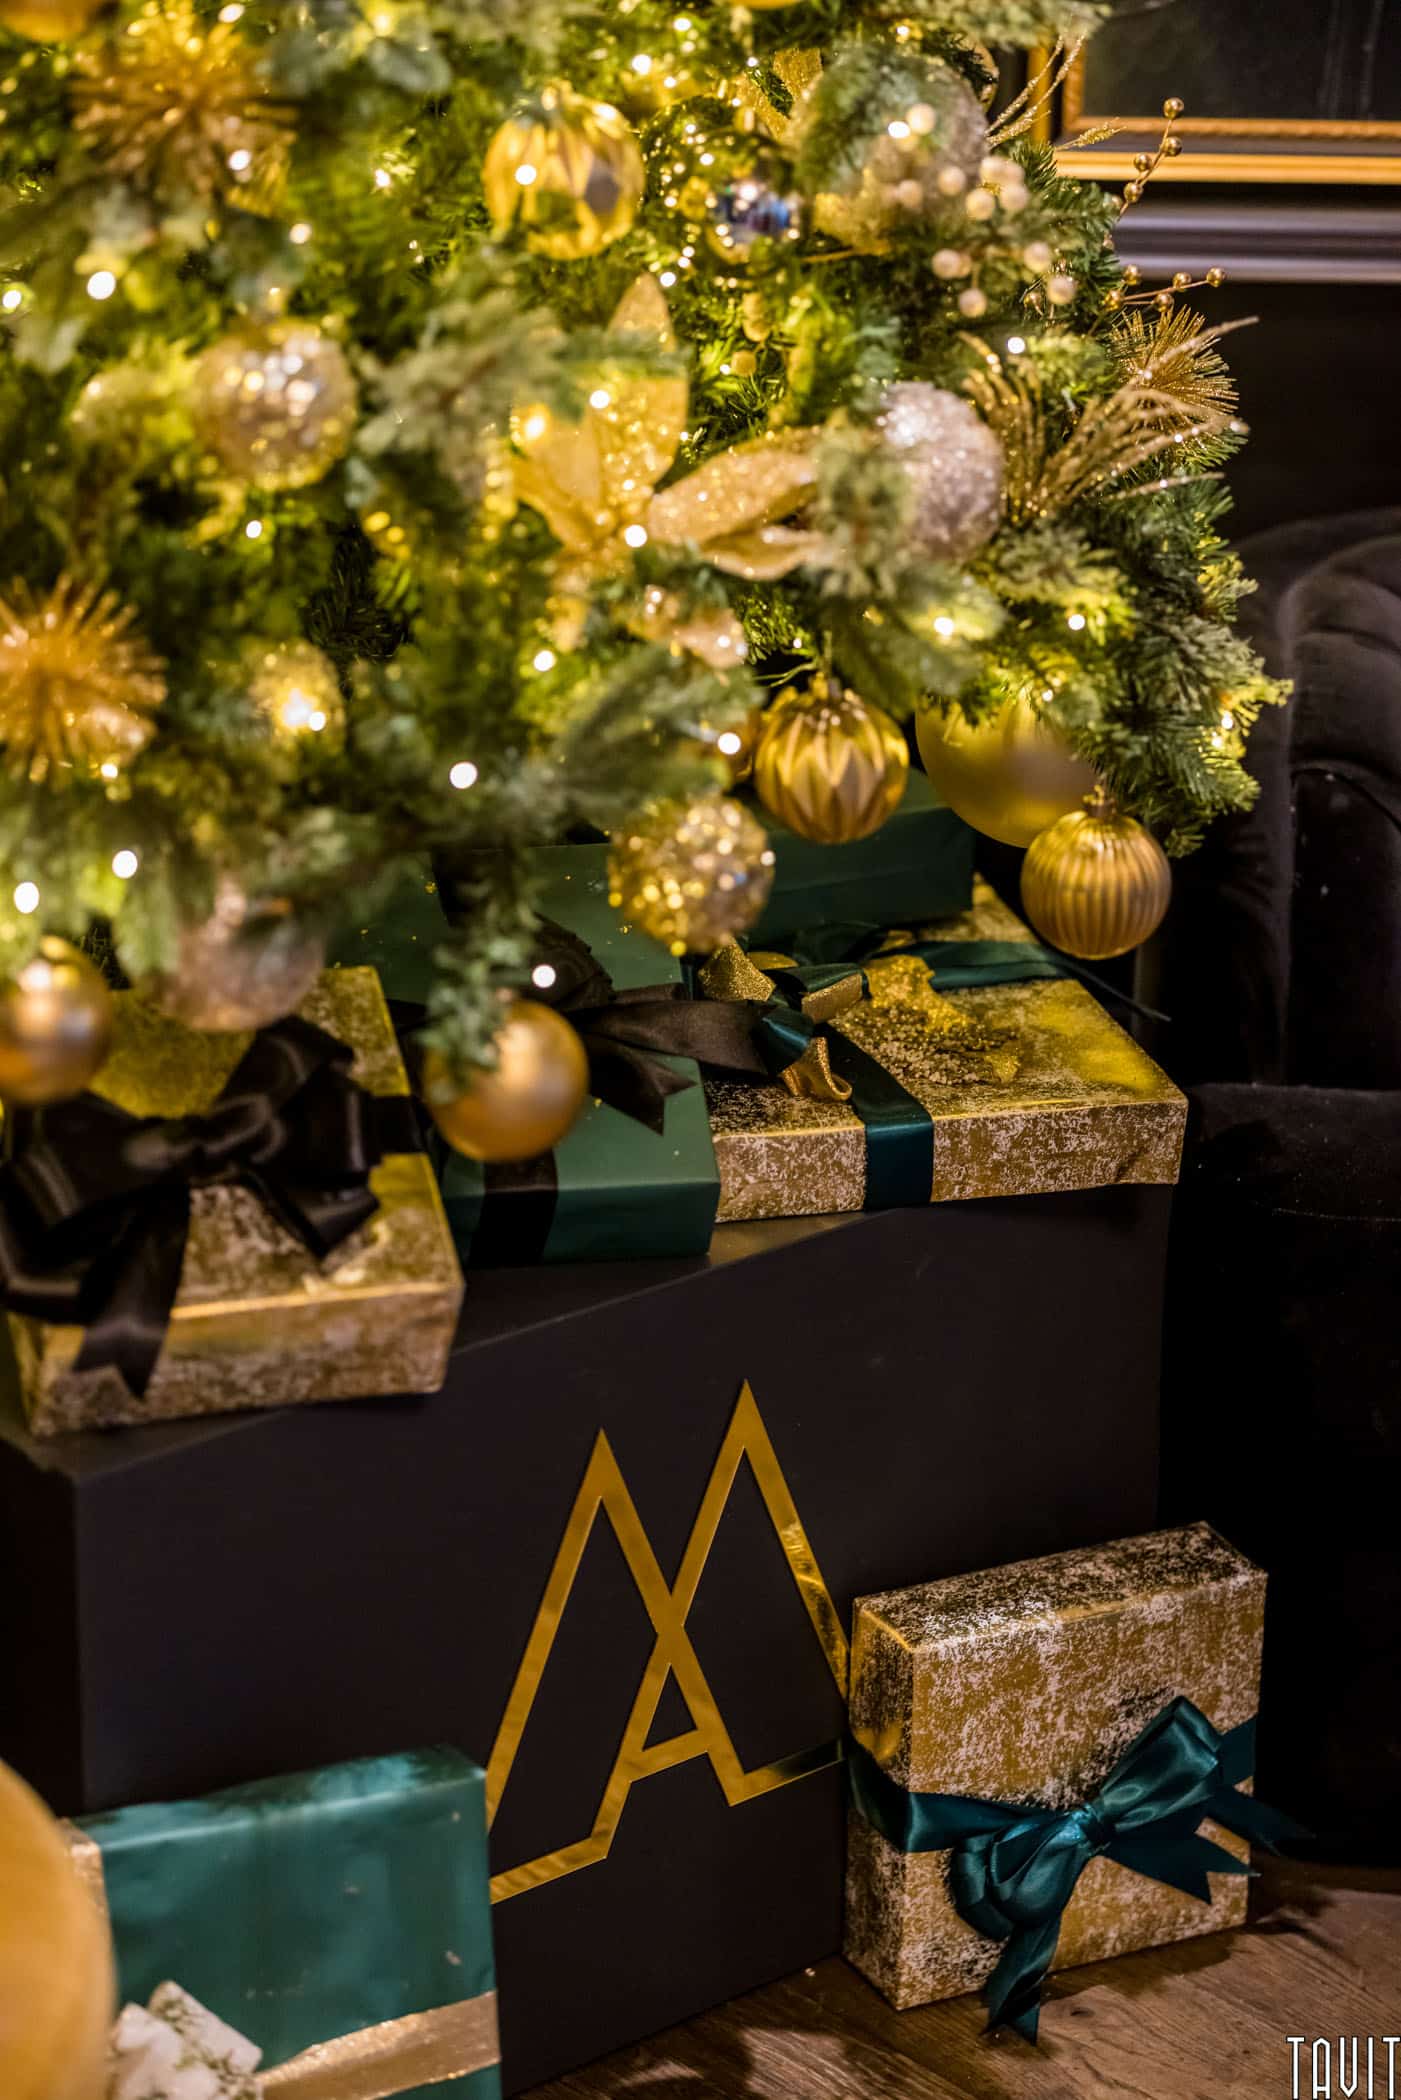 Close up of presents under Christmas tree